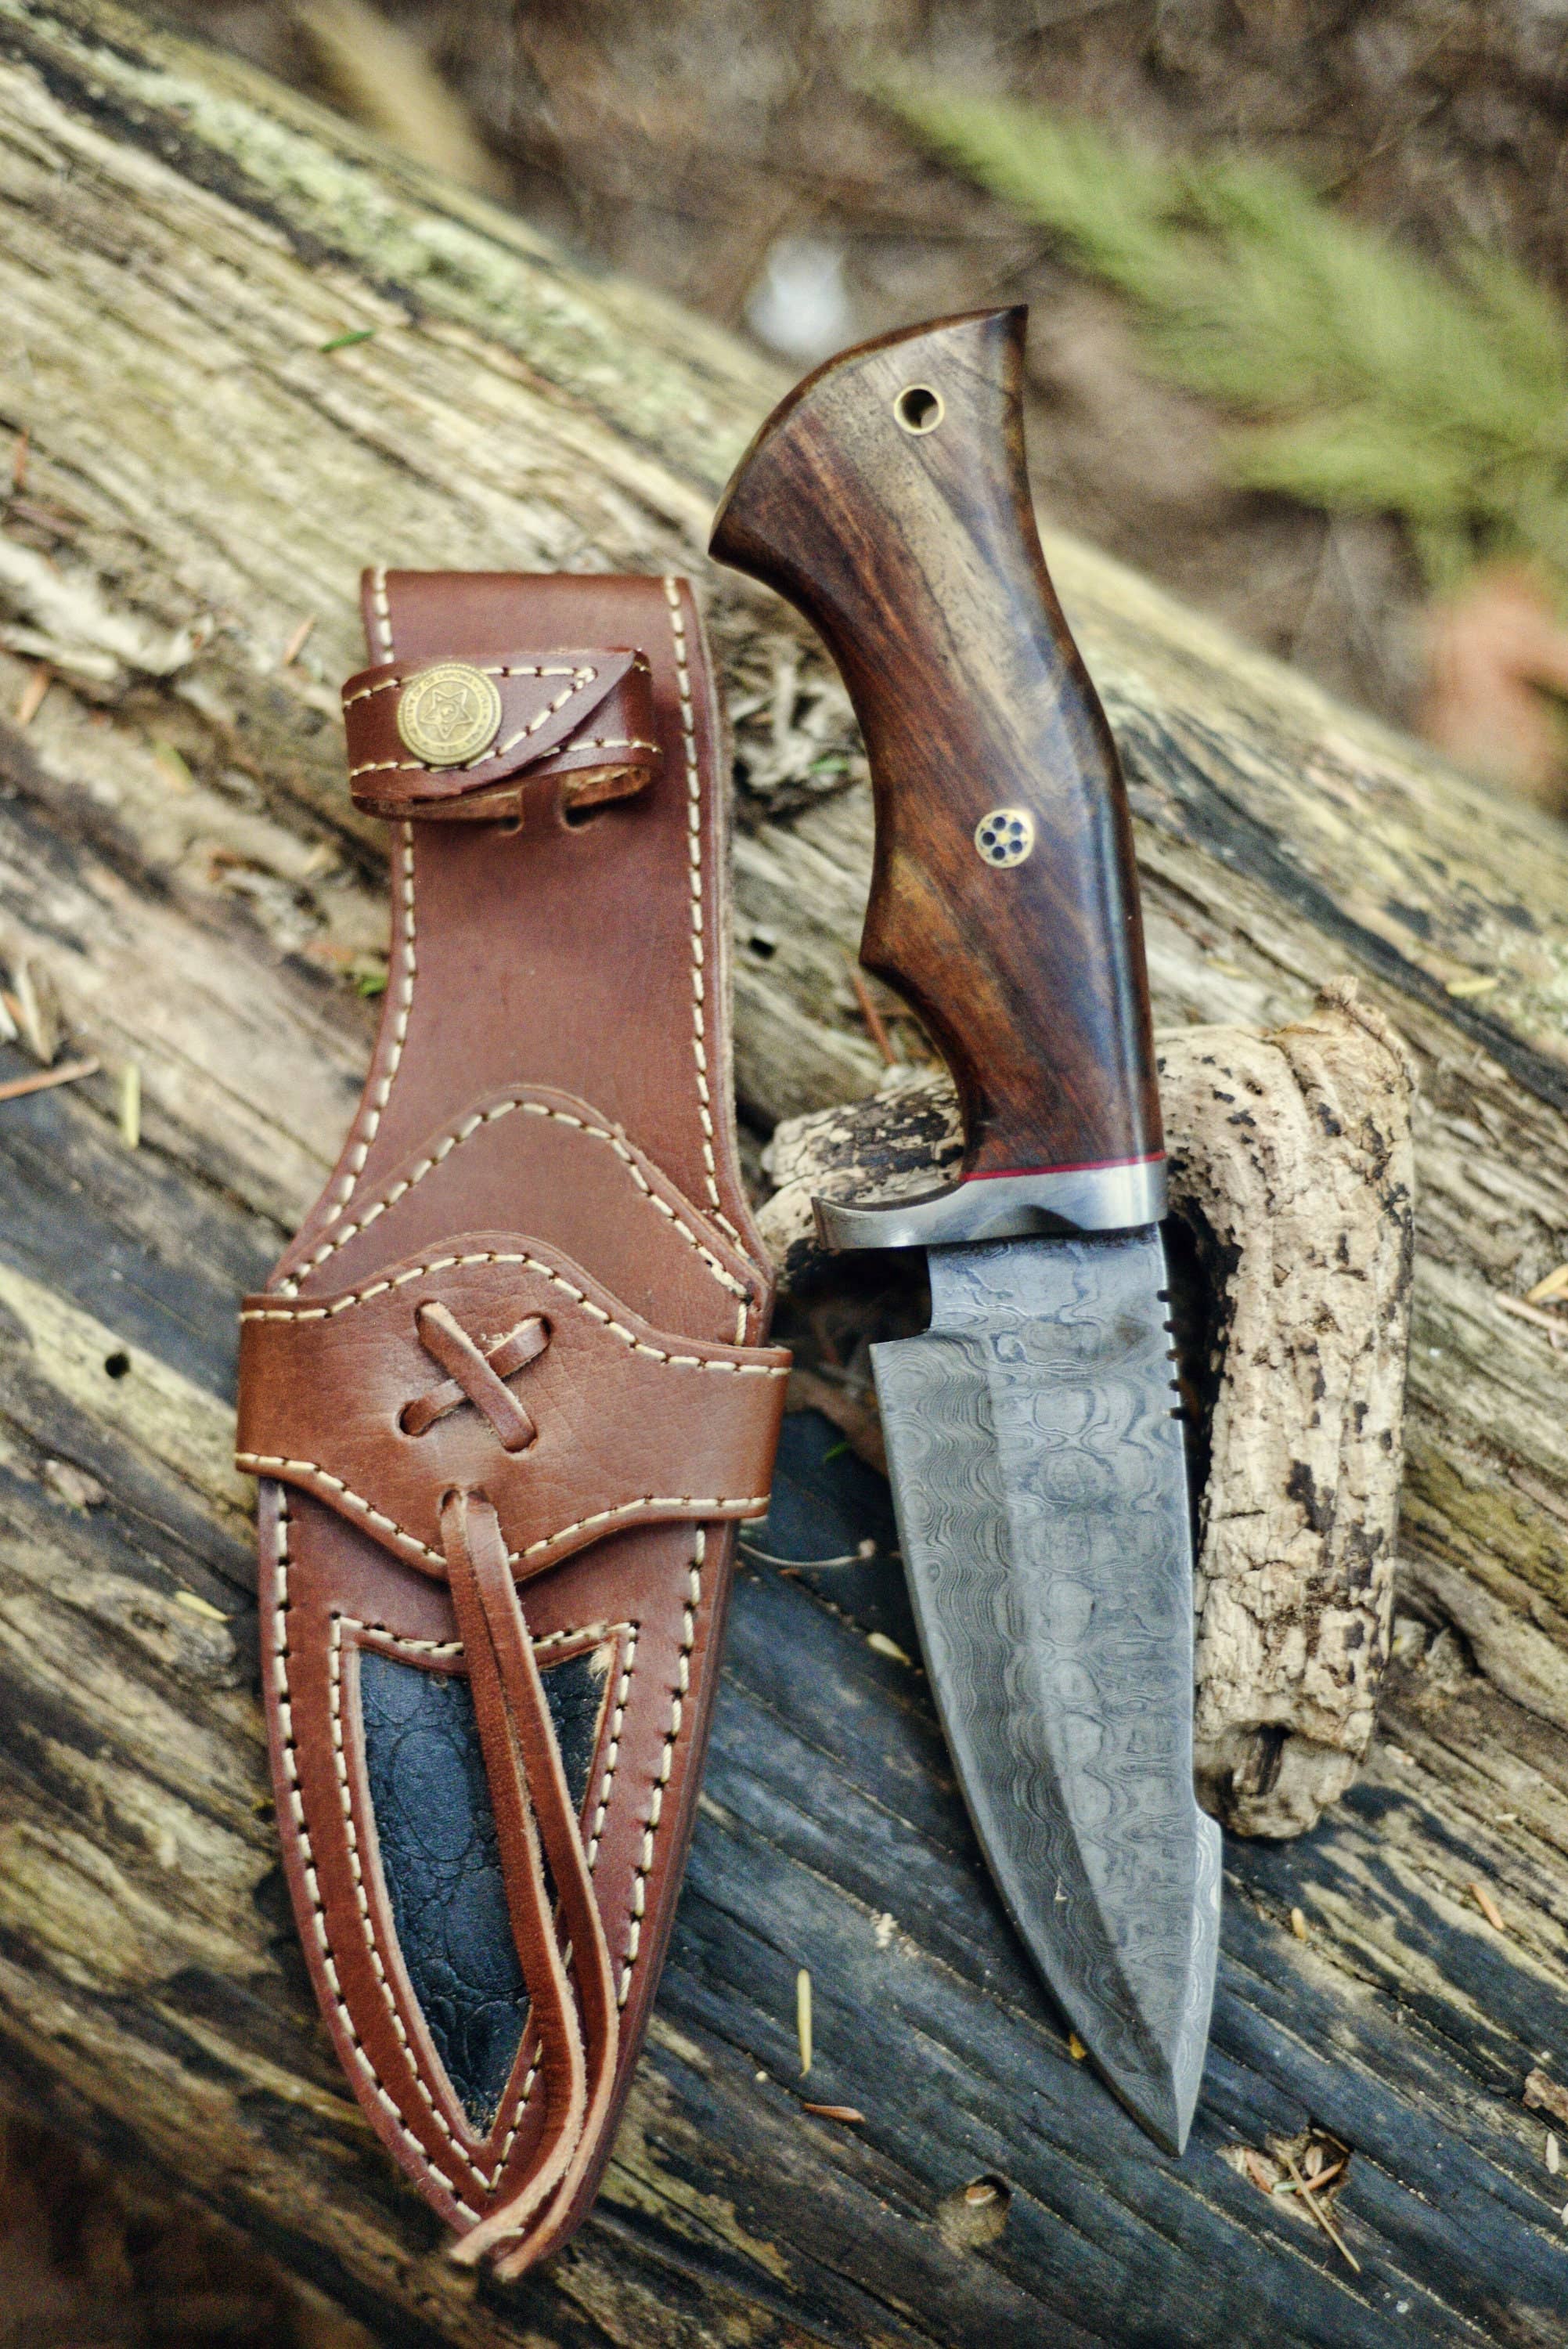 Knife - Damascus Premium Quality Hunting And Camping: Bluewood Handle